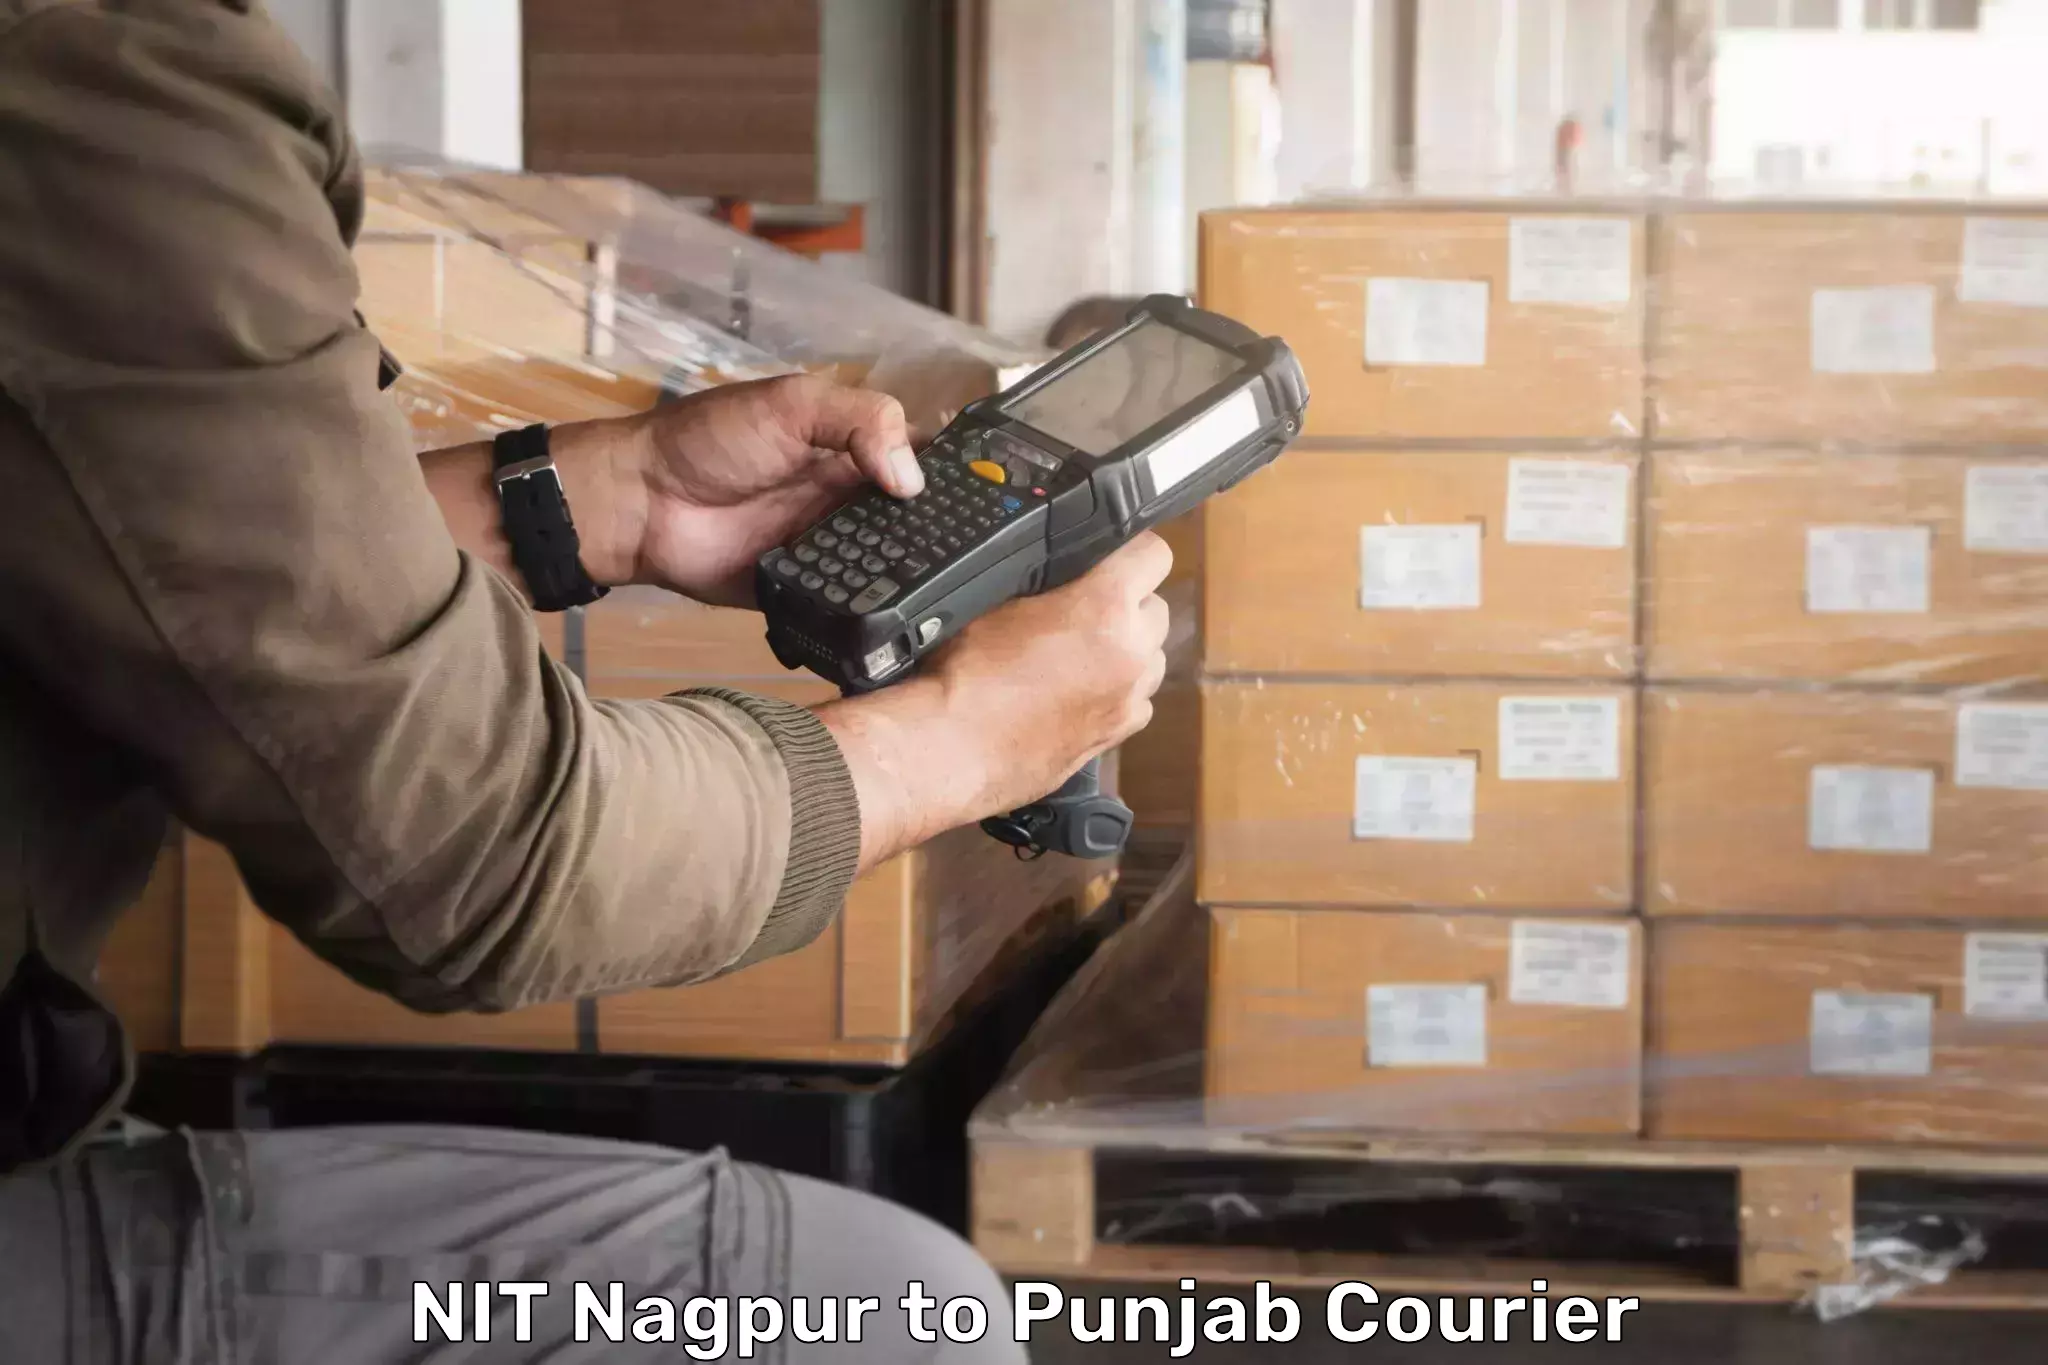 User-friendly delivery service NIT Nagpur to Goindwal Sahib